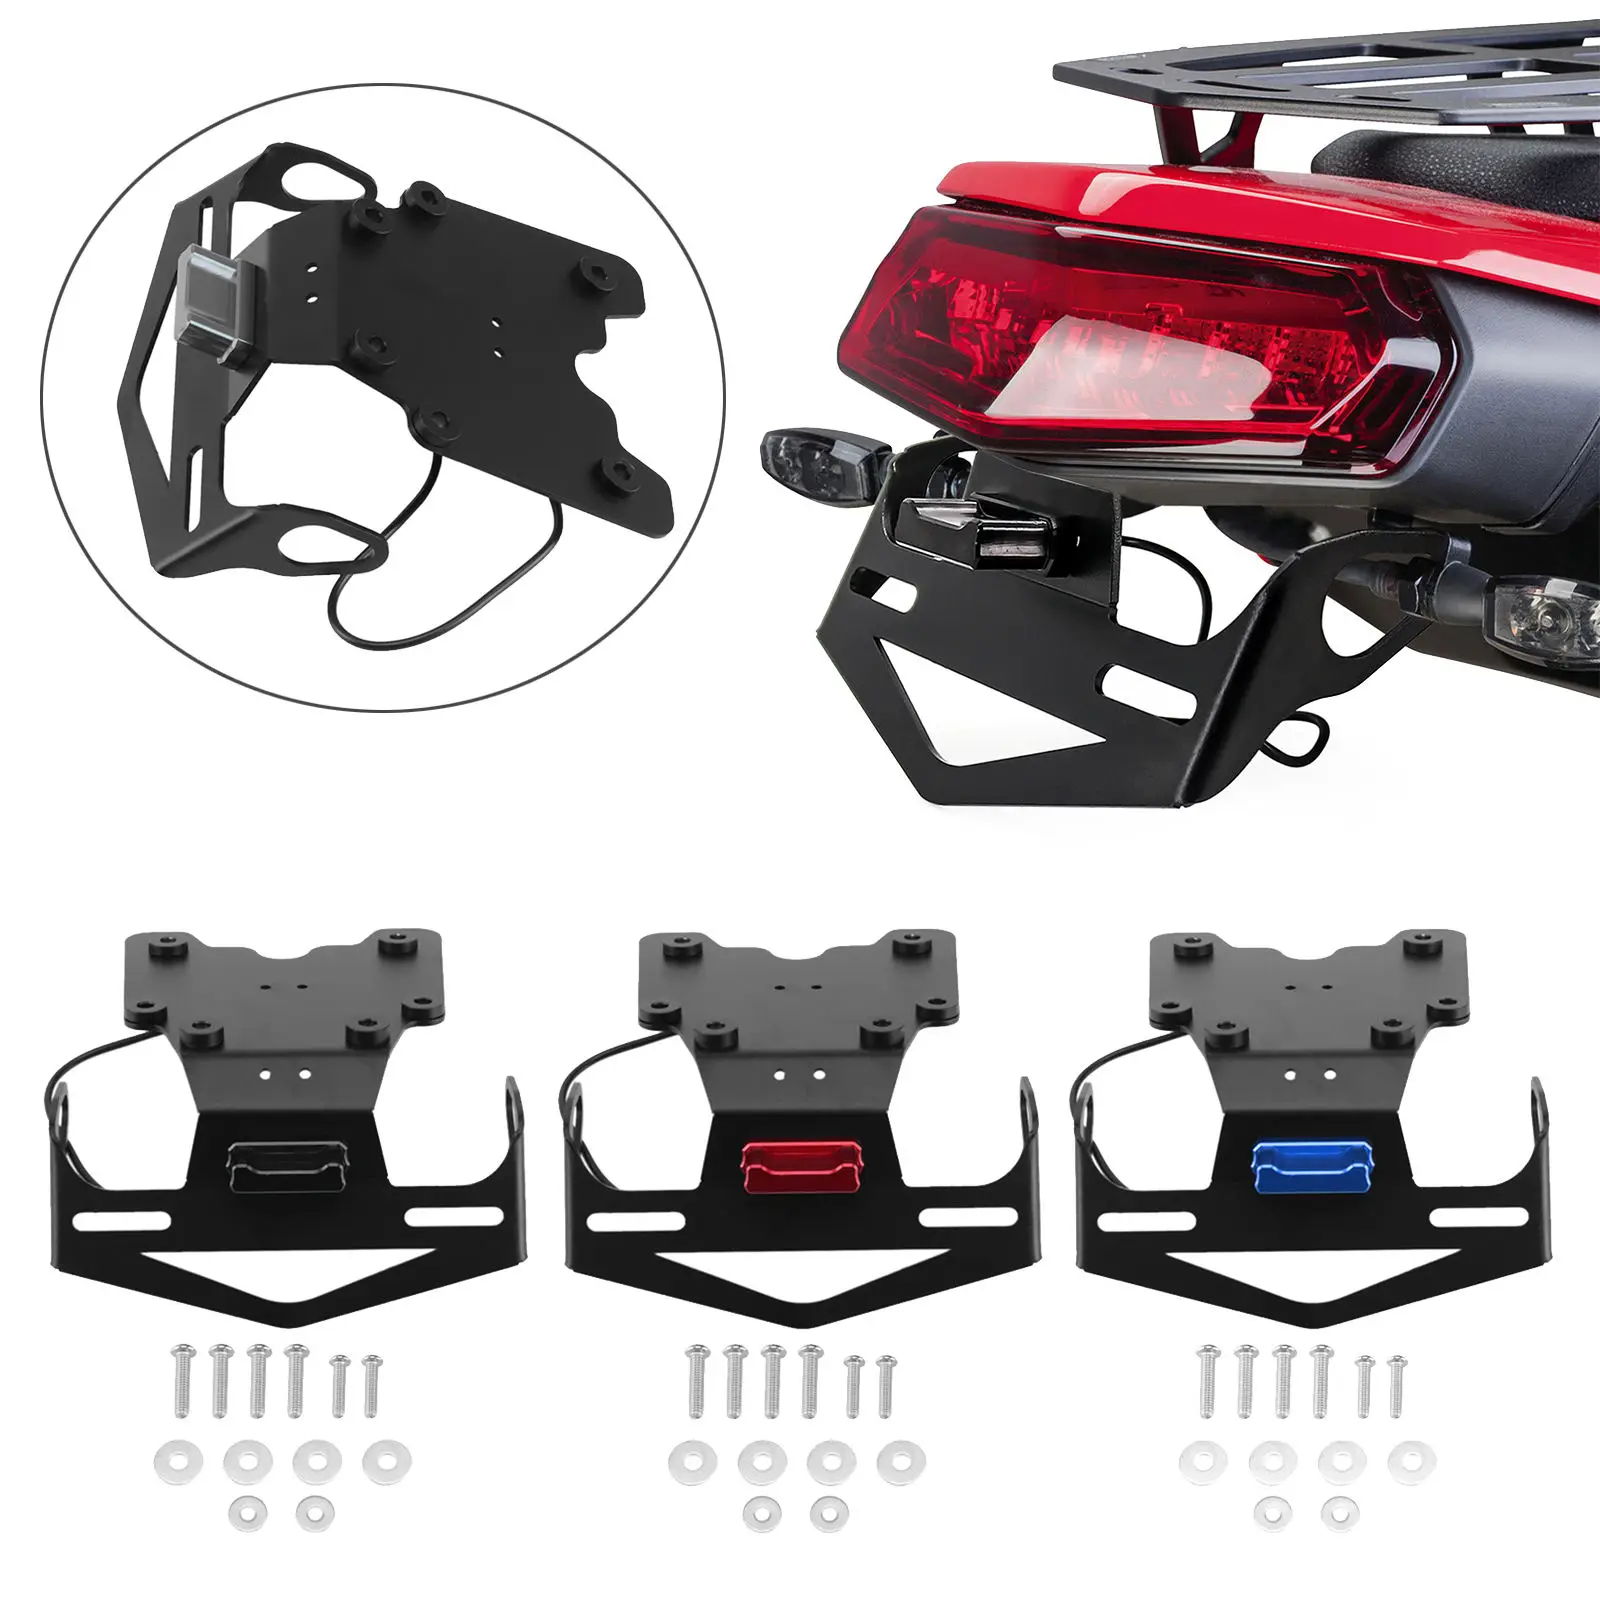 Motorbike Motorcycle Rear License Plate Holder Mount Compatible with Yamaha Tenere 700 2019 2020 2021